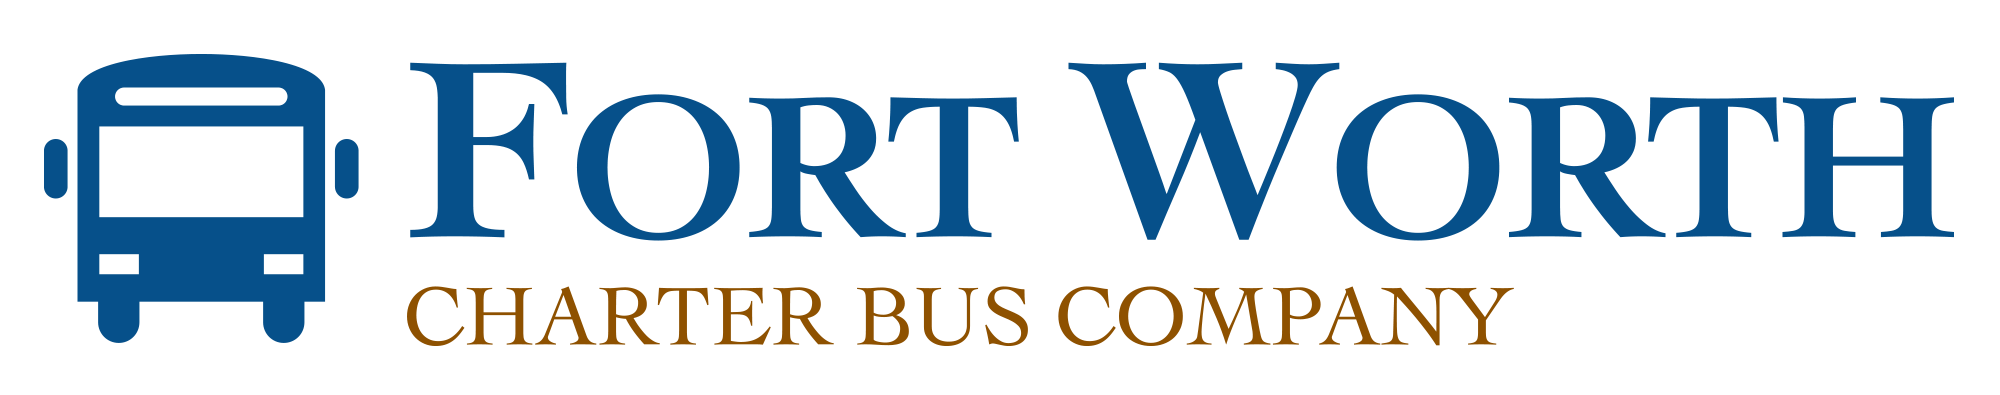 Fort Worth Charter Bus Company